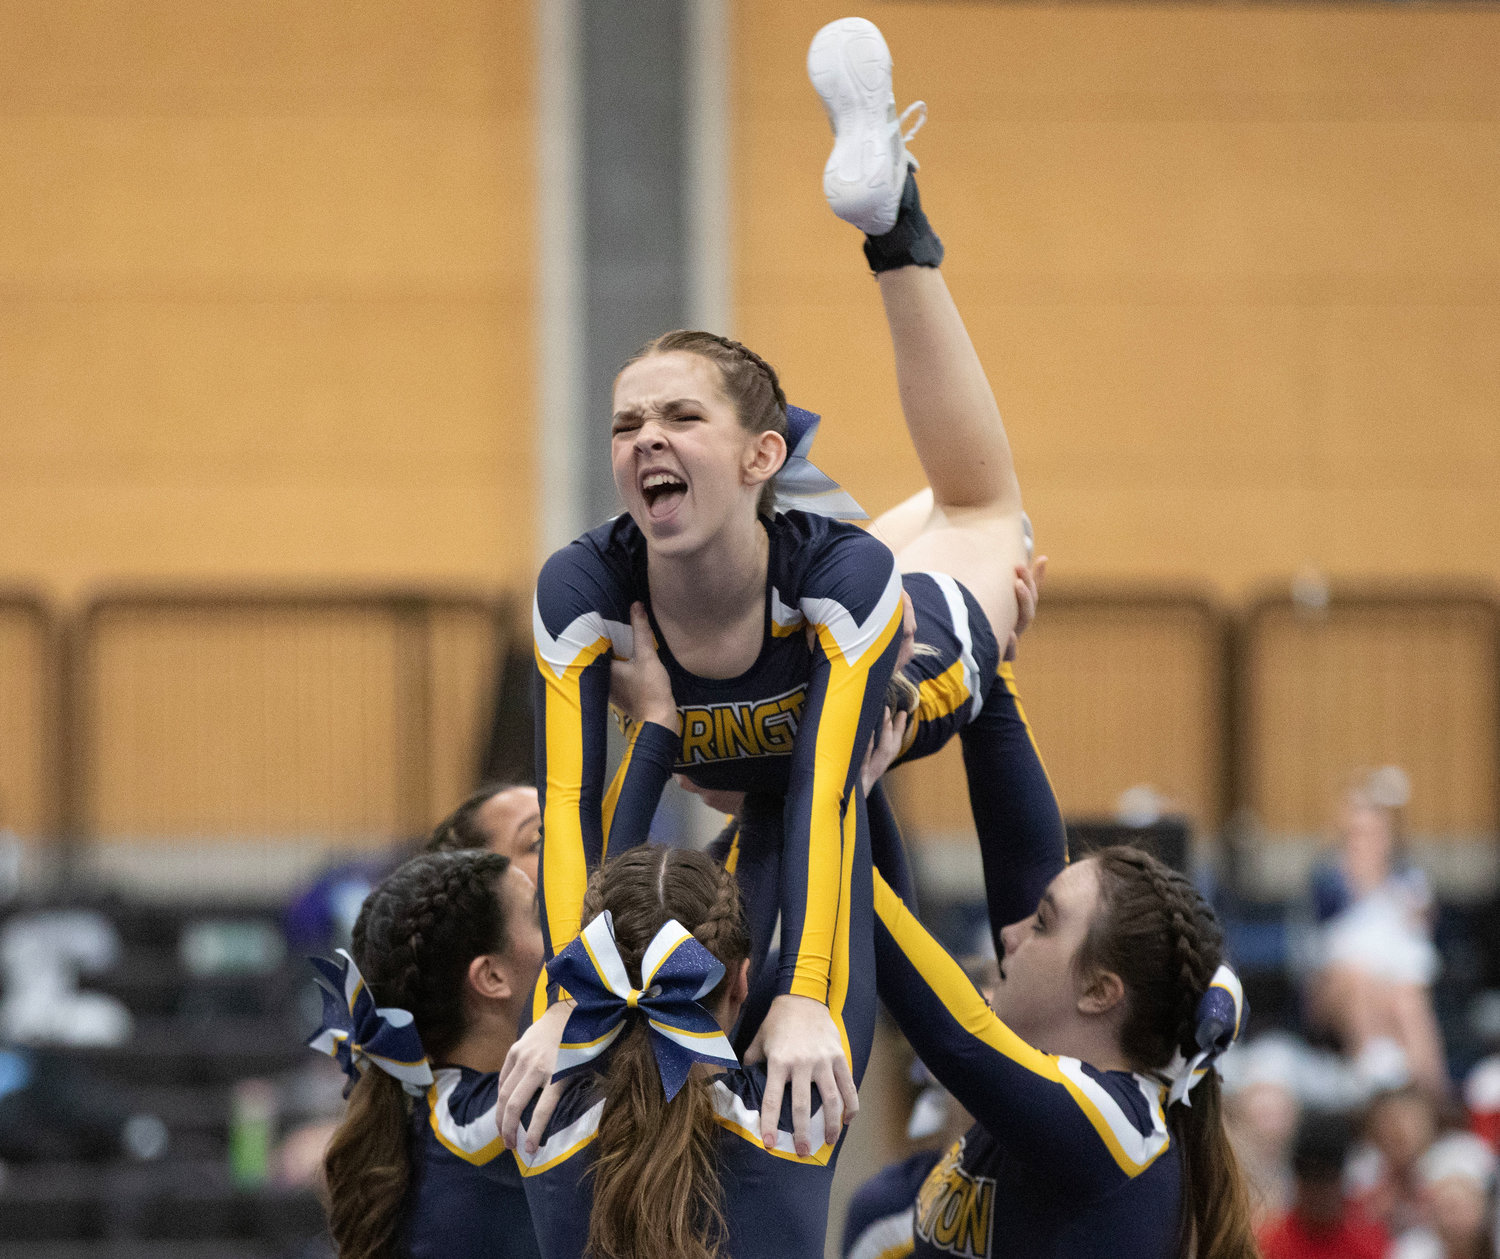 Teammates lift Morgane Seadale during a stunt at the Rhode Island Interscholastic League Division II Cheer Competition.